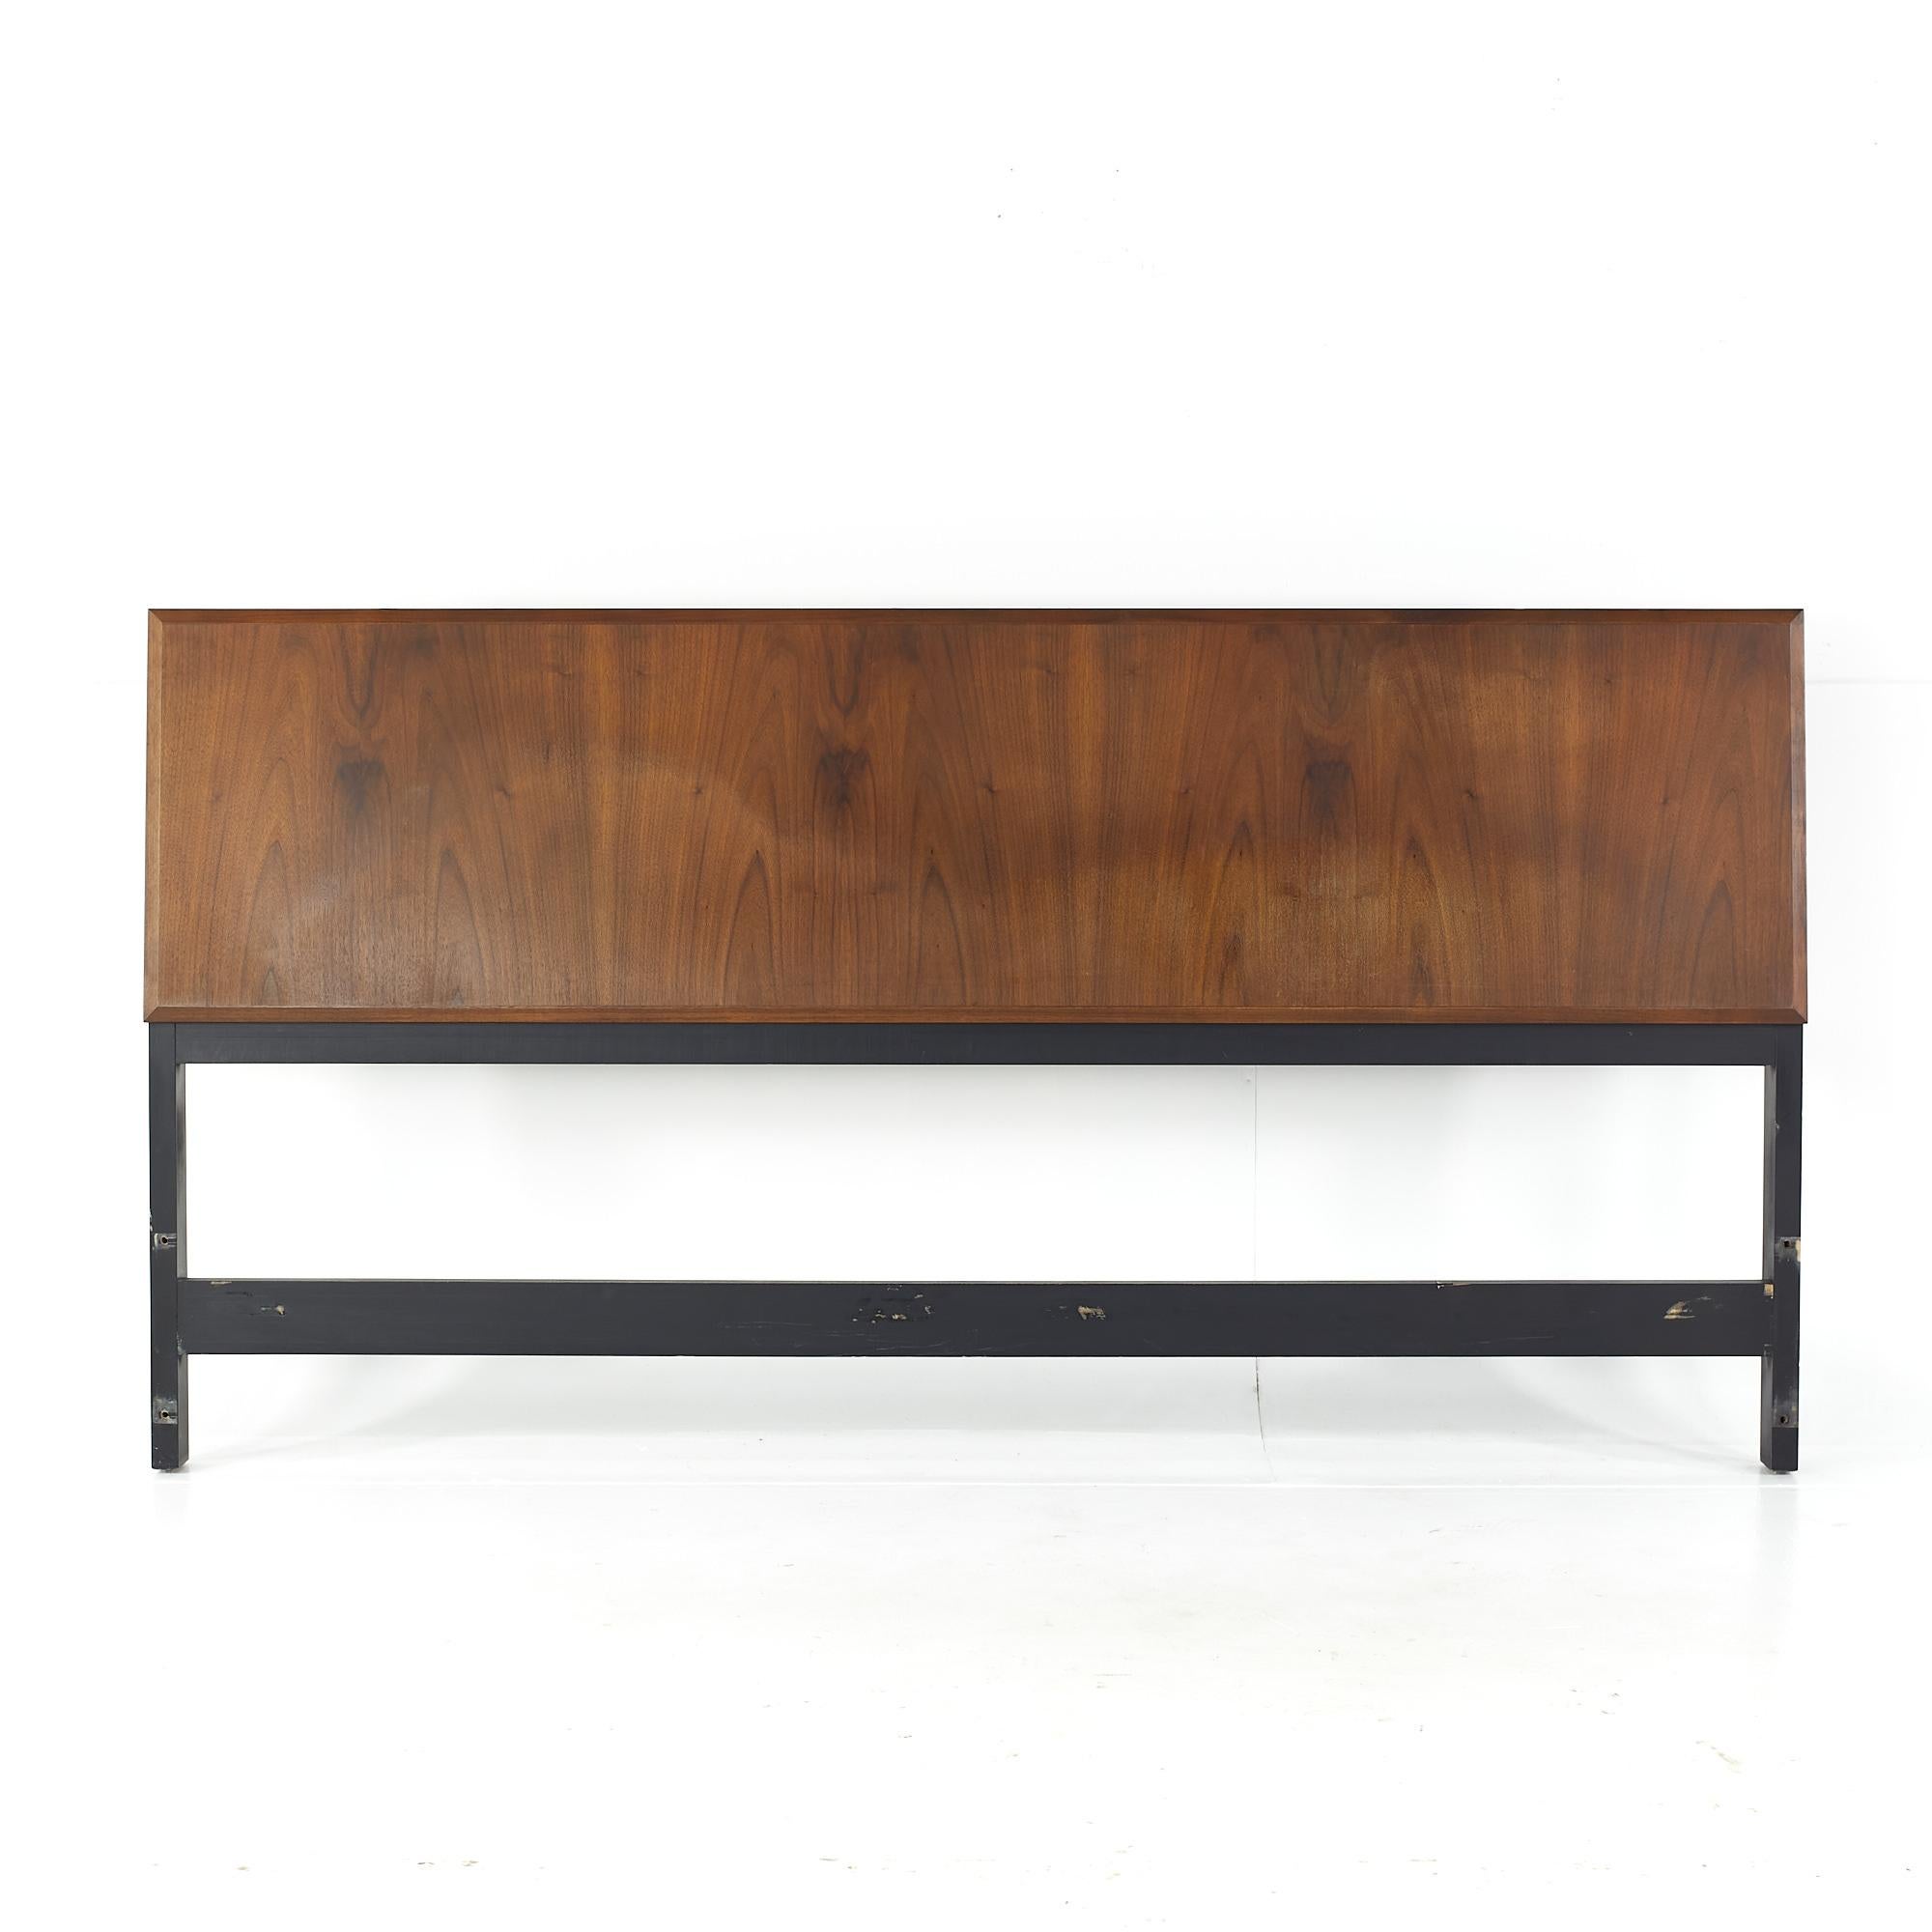 Milo Baughman for Directional Mid Century Walnut King Headboard

This headboard measures: 78 wide x 3.5 deep x 41 inches high

All pieces of furniture can be had in what we call restored vintage condition. That means the piece is restored upon